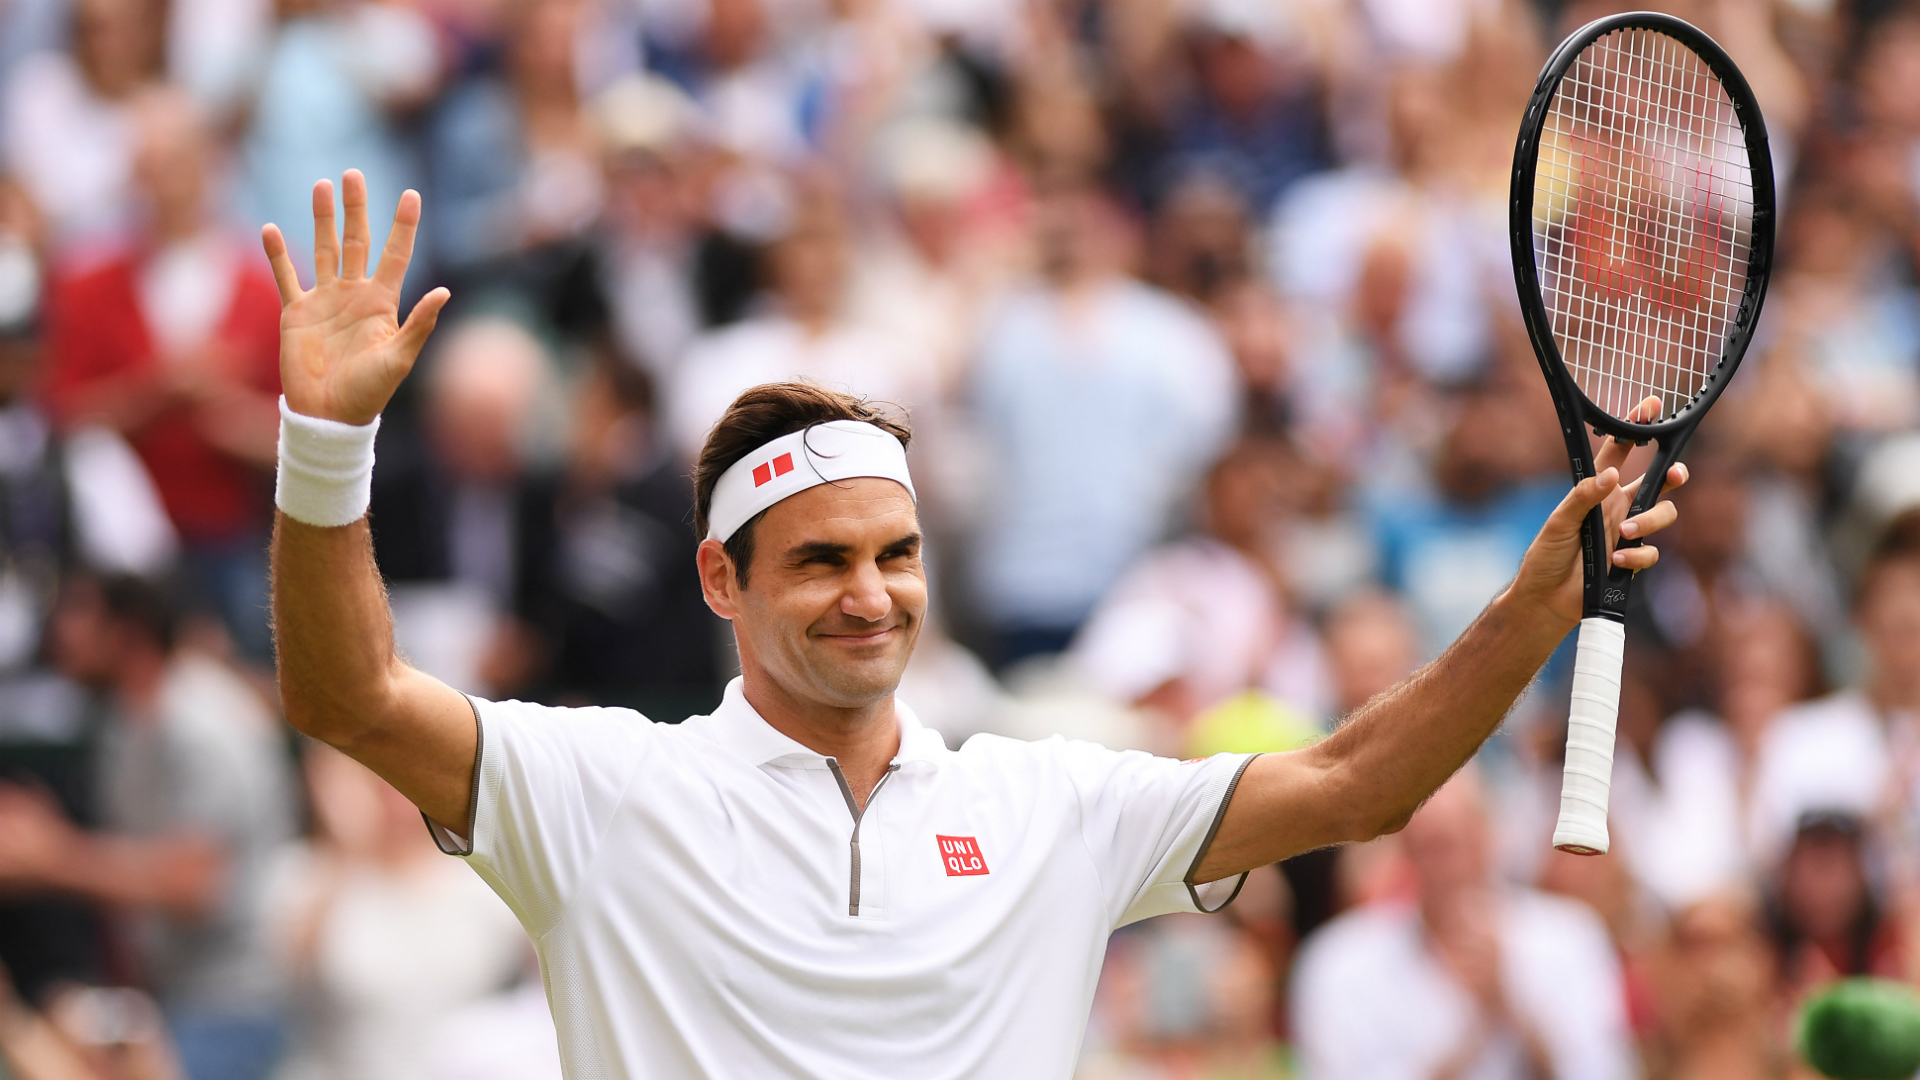 Wimbledon 2019: Roger Federer eases into second week | Sporting News